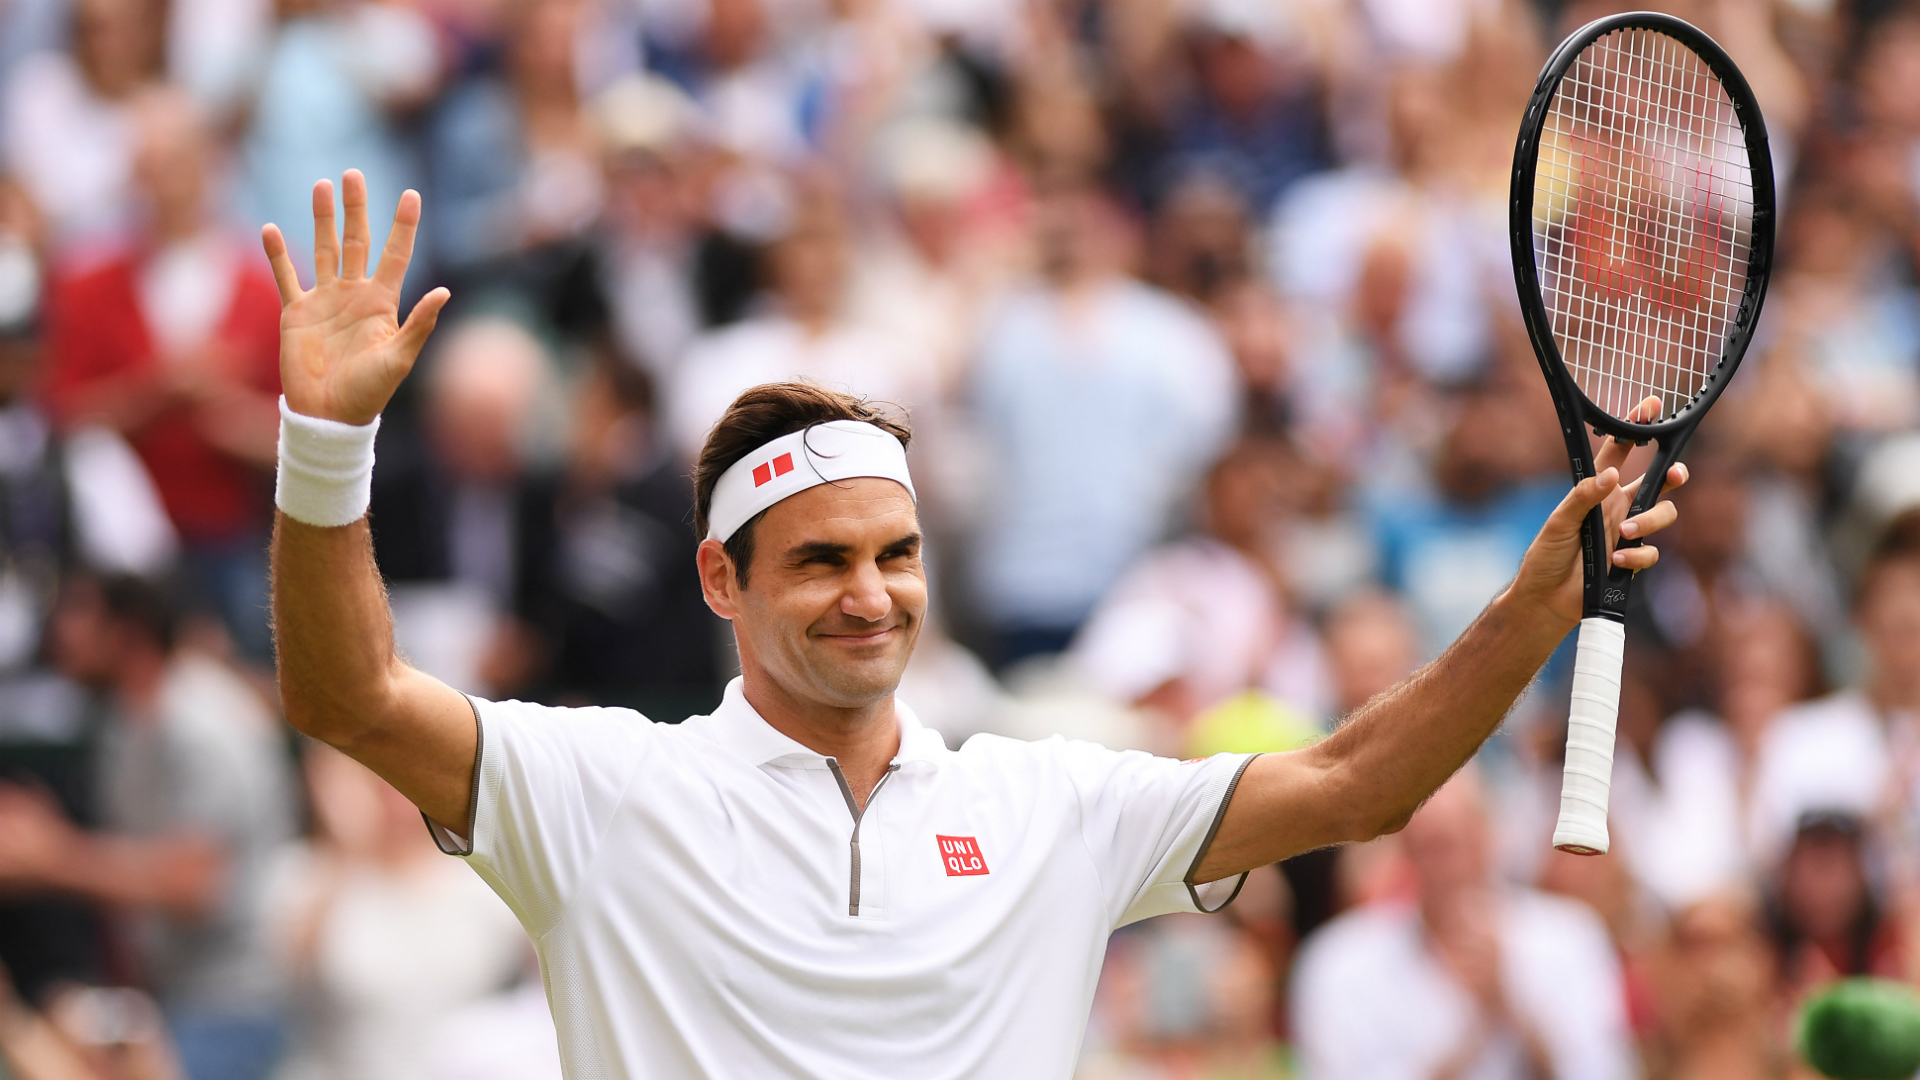 Wimbledon 2019: Roger Federer eases into second week | Sporting News